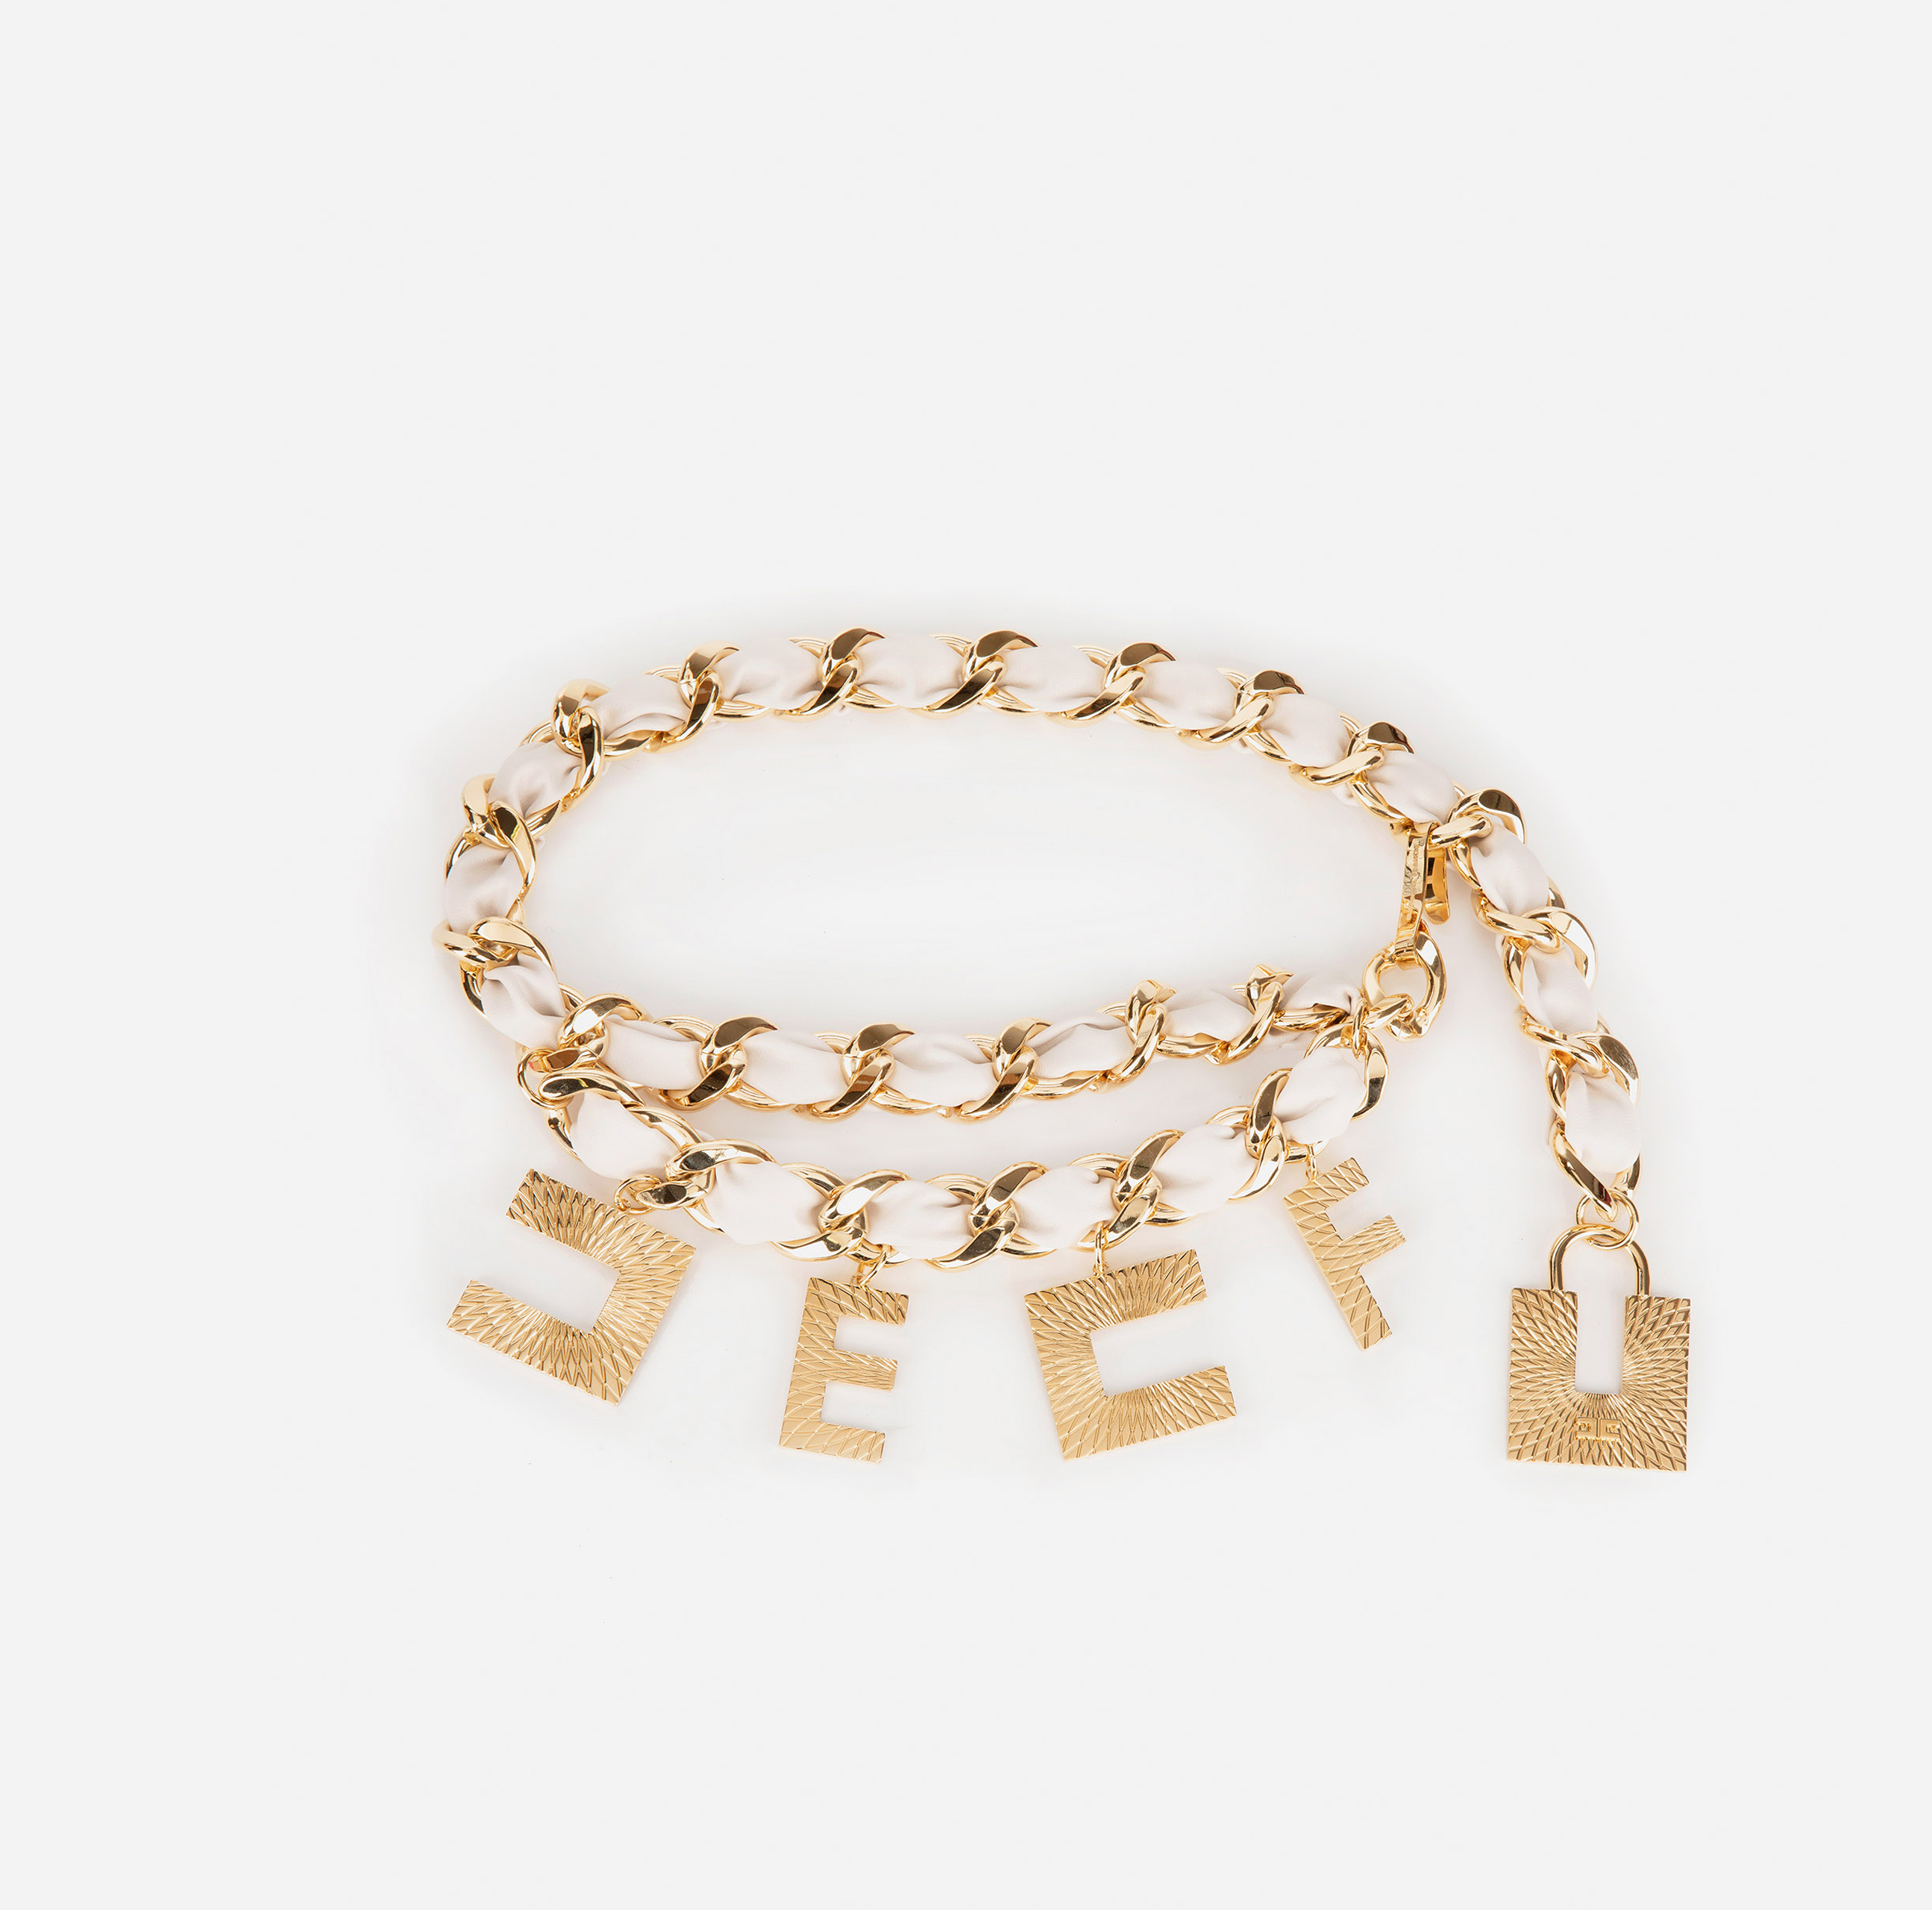 Chain belt with charms - Elisabetta Franchi